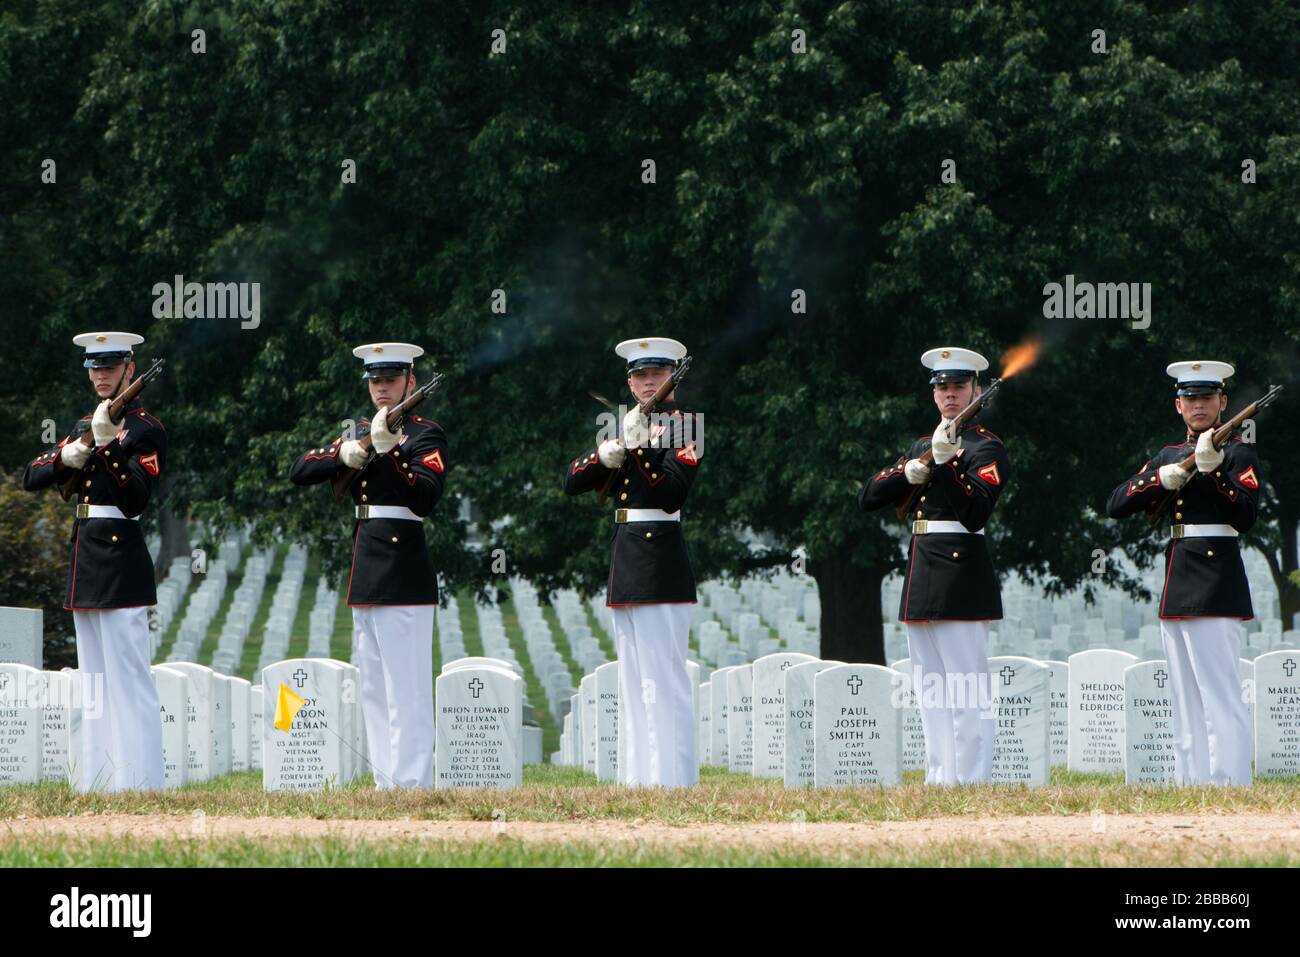 'Members of the U.S. Marine Corps participate in the graveside service for U.S. Marine Corps Pfc. Anthony Brozyna in Section 60 of Arlington National Cemetery, Aug. 31, 2016, in Arlington, Va. Brozyna, of Hartford, Connecticut, died Nov. 20, 1943 during the battle of Tarawa. His remains were recently recovered and identified. (U.S. Army photo by Rachel Larue/Arlington National Cemetery/released); 31 August 2016, 13:05; Graveside service for U.S. Marine Corps Pfc. Anthony Brozyna in Section 60 of Arlington National Cemetery; Arlington National Cemetery; ' Stock Photo